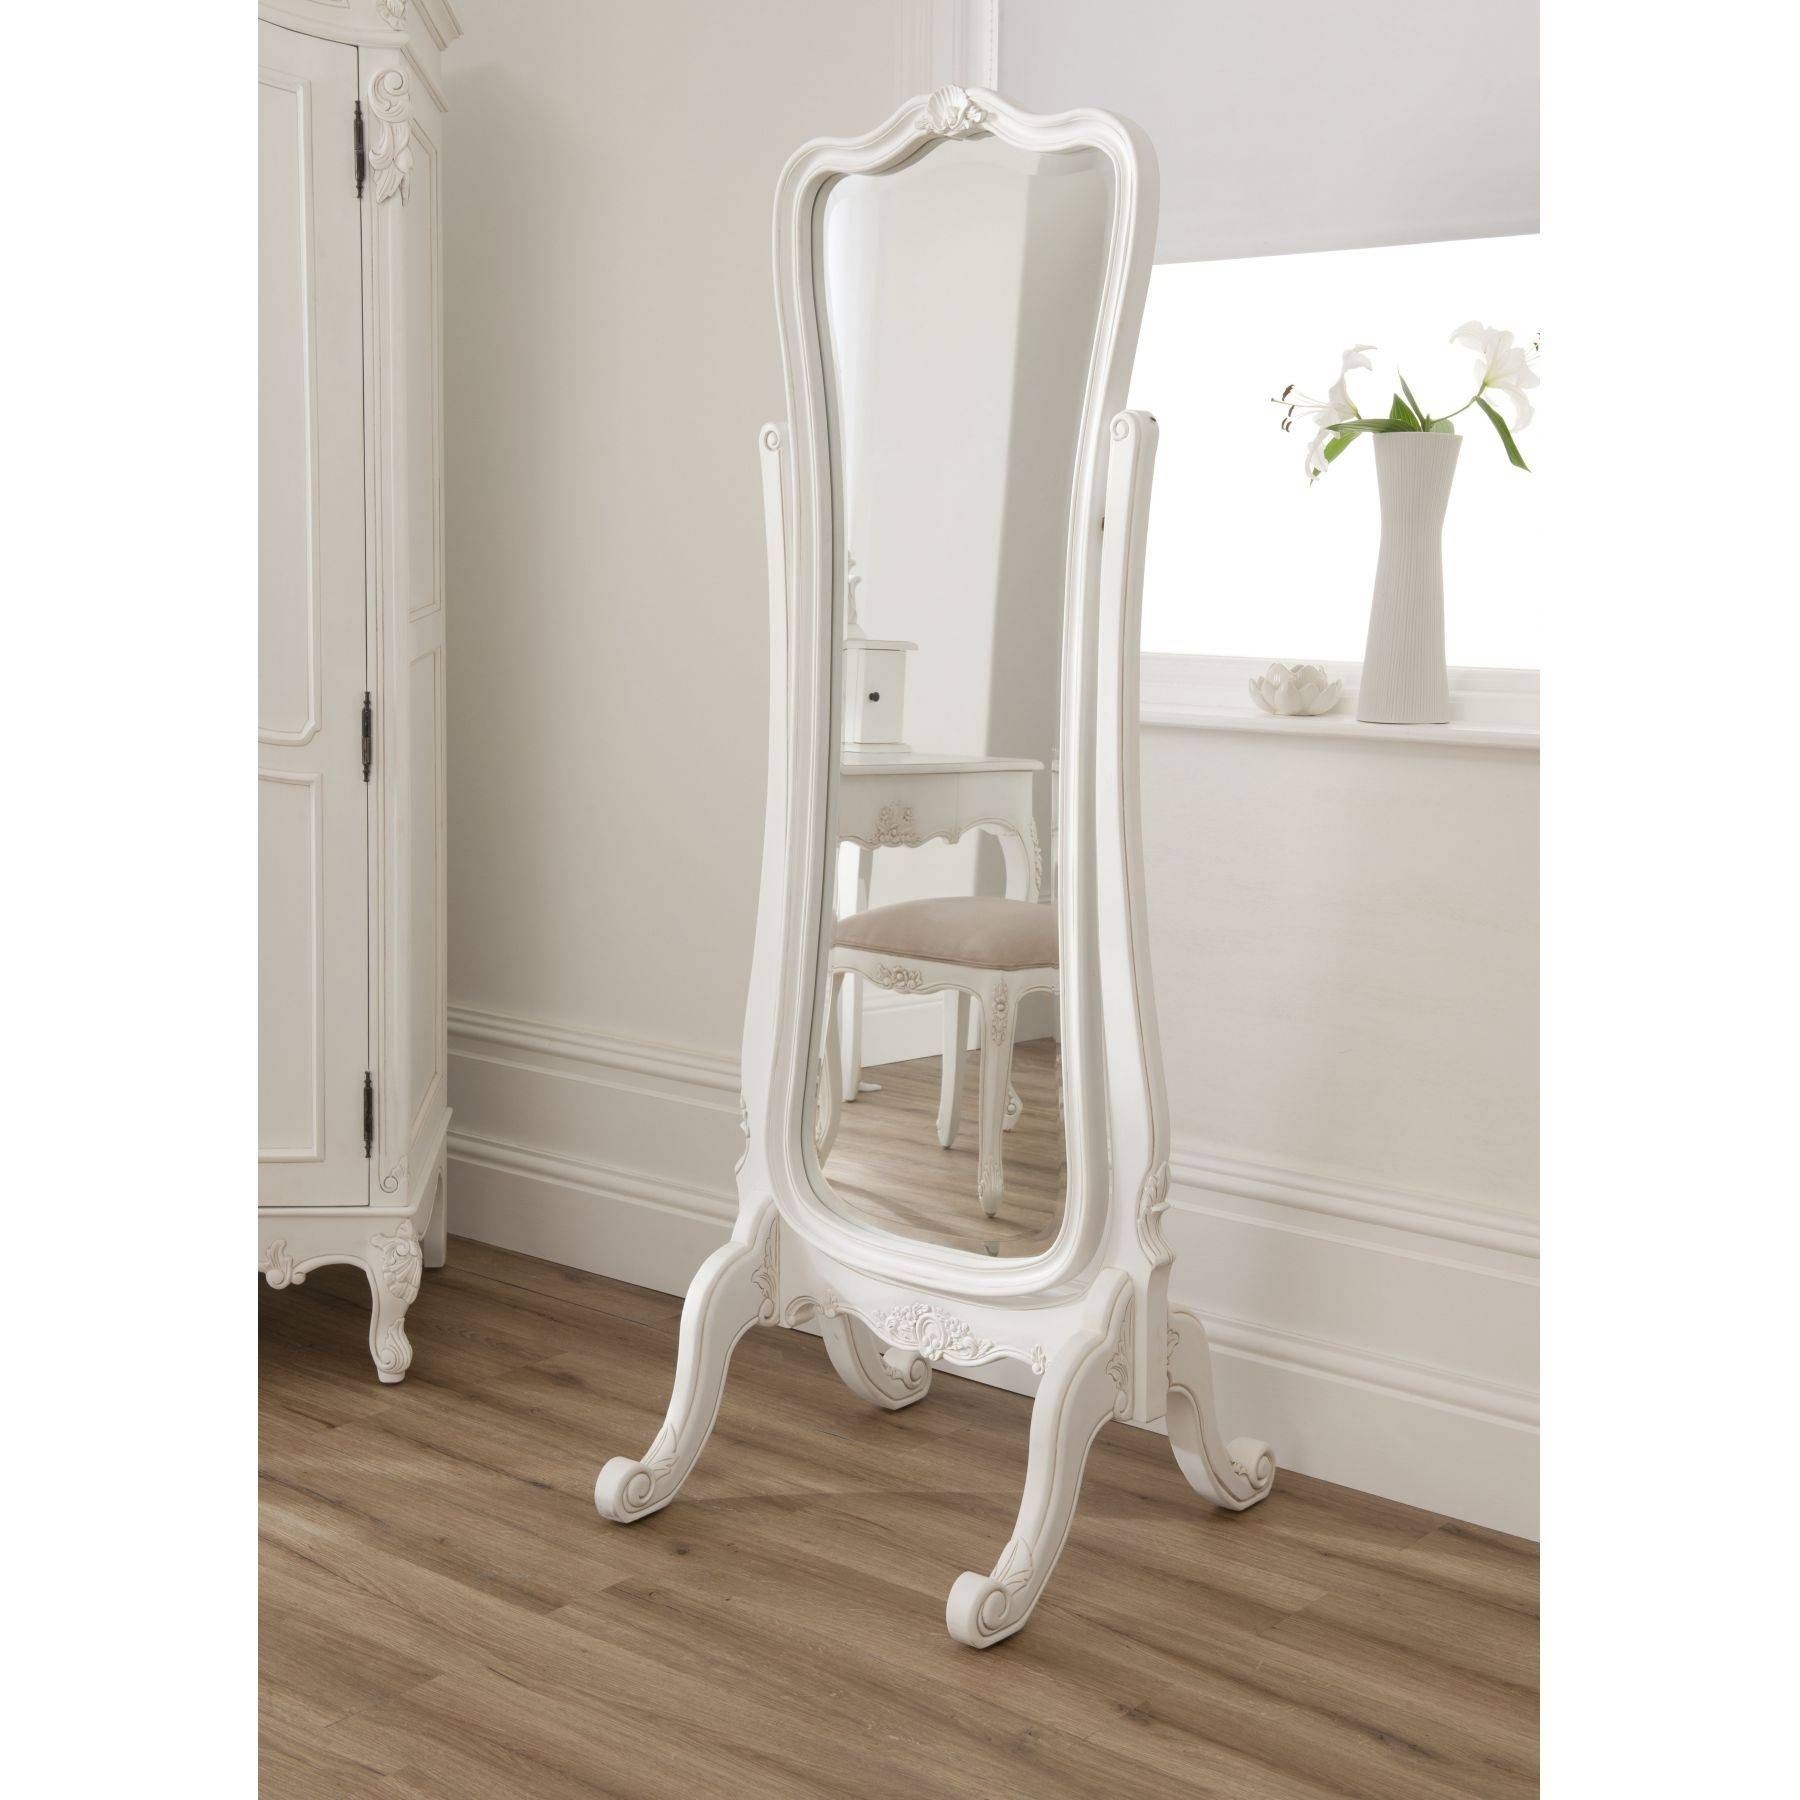 Free Standing Mirror Full Length | Vanity And Nightstand Decoration With Regard To Full Length Free Standing Mirrors With Drawer (View 14 of 25)